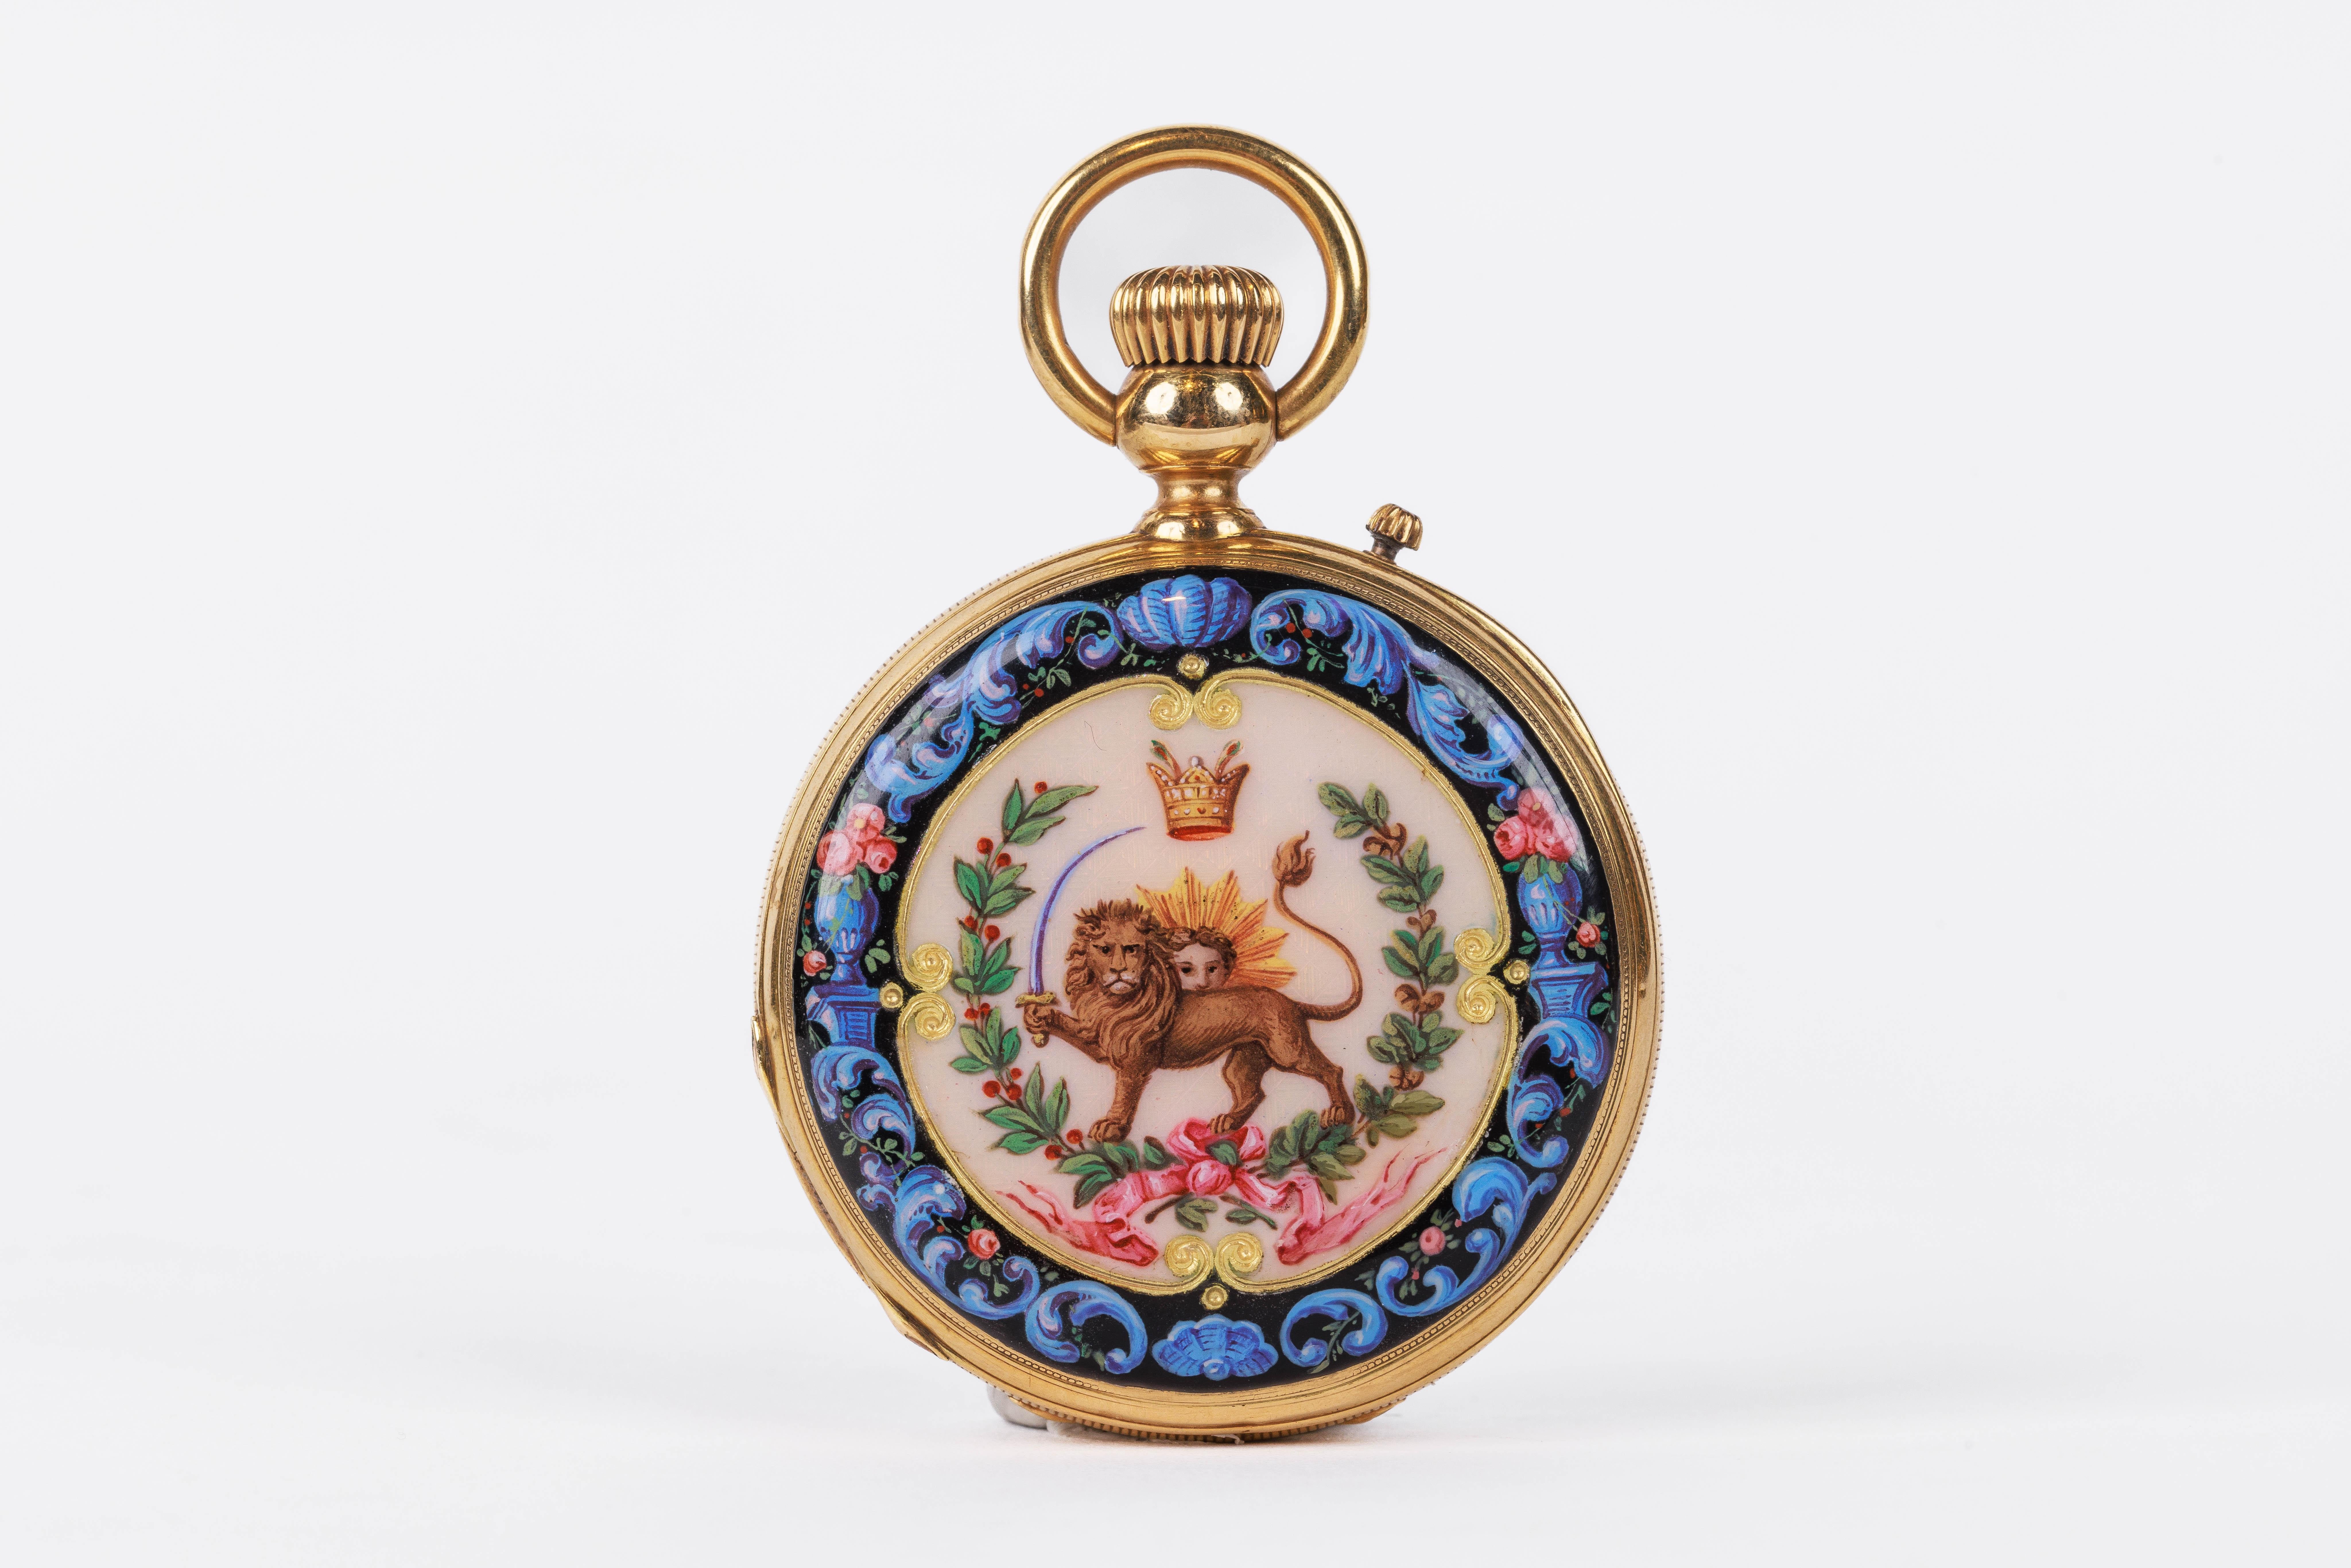 Rare Gold and Enamel Presentation Pocket Watch with Portrait of Naser Shah For Sale 4